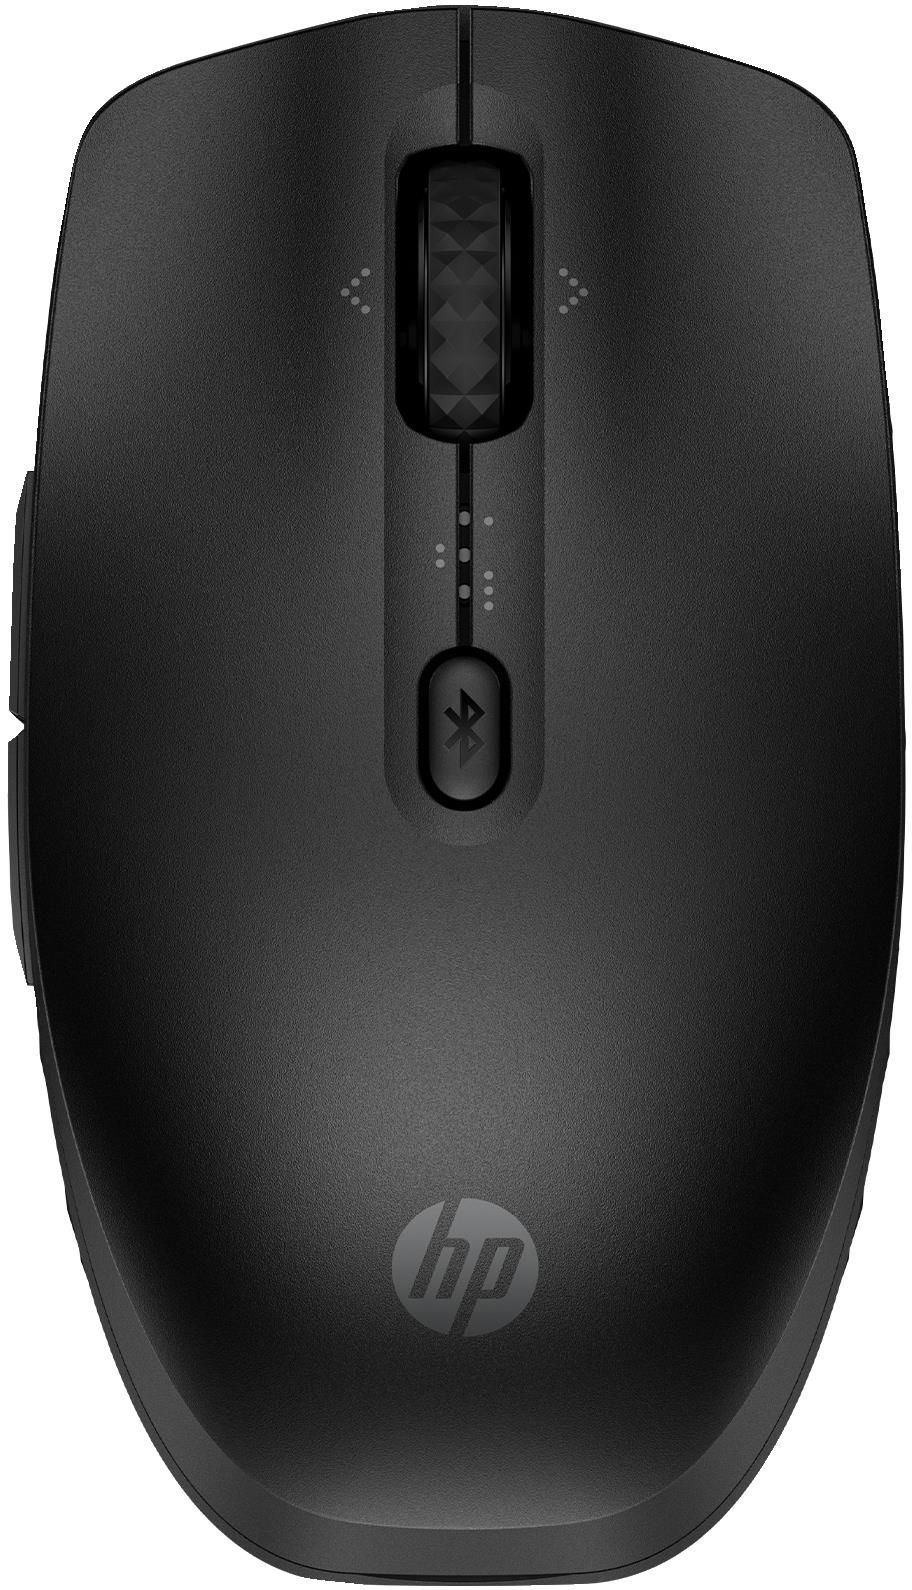 HP 425 Mouse Programmable